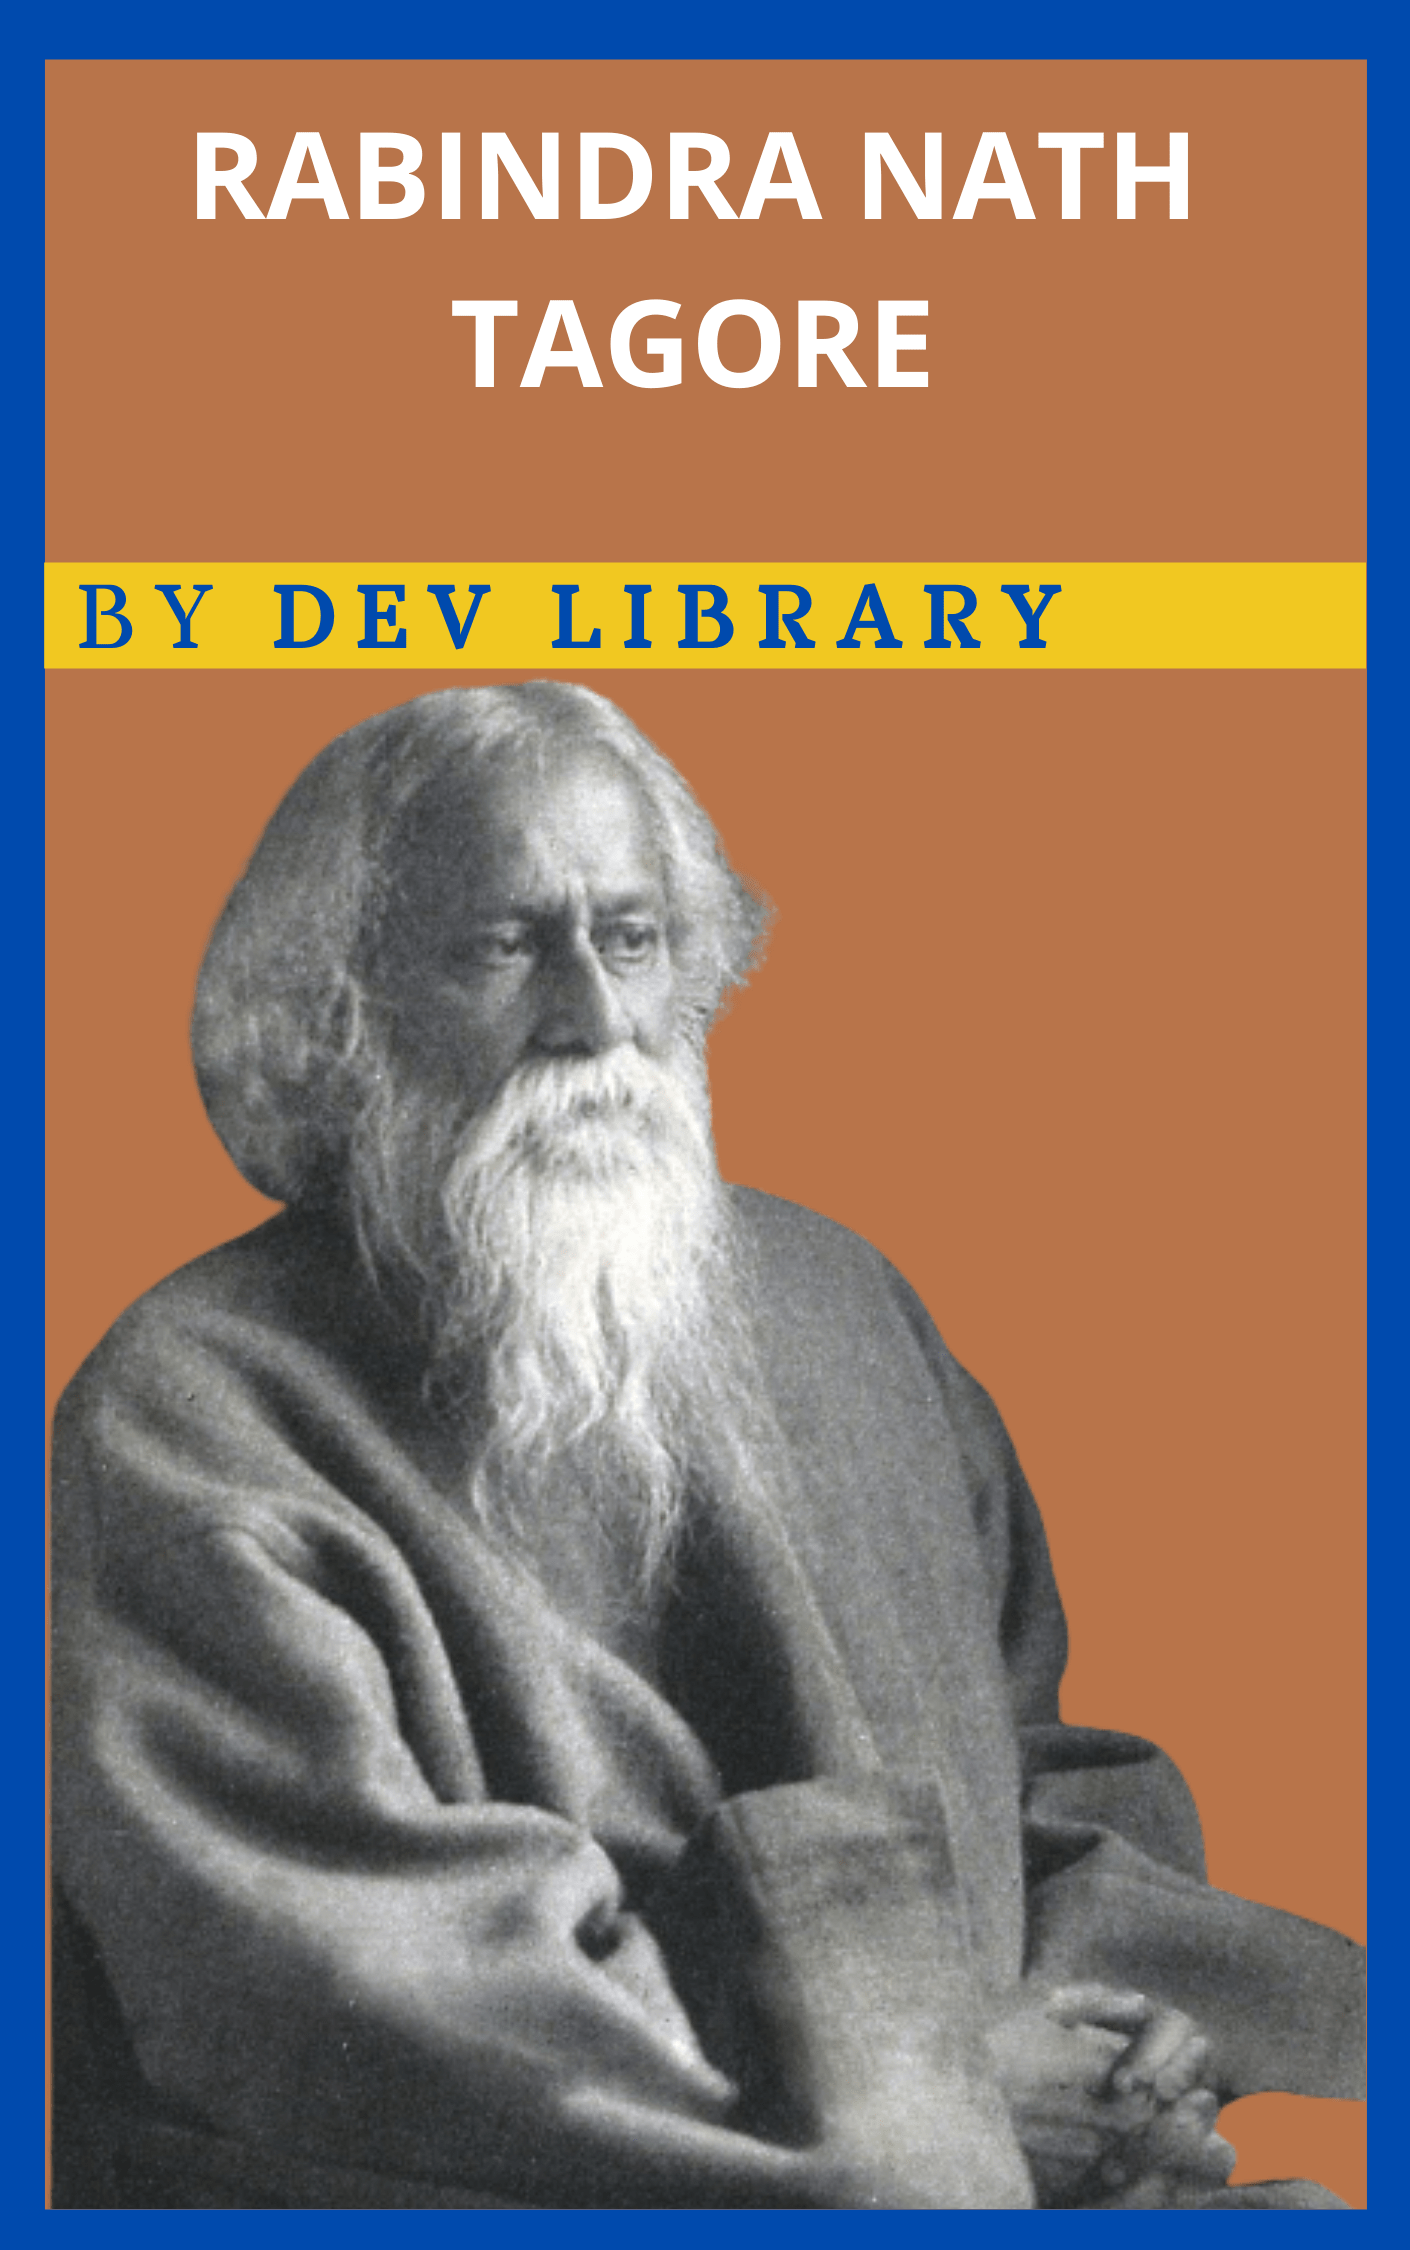 biography of rabindranath tagore for class 7